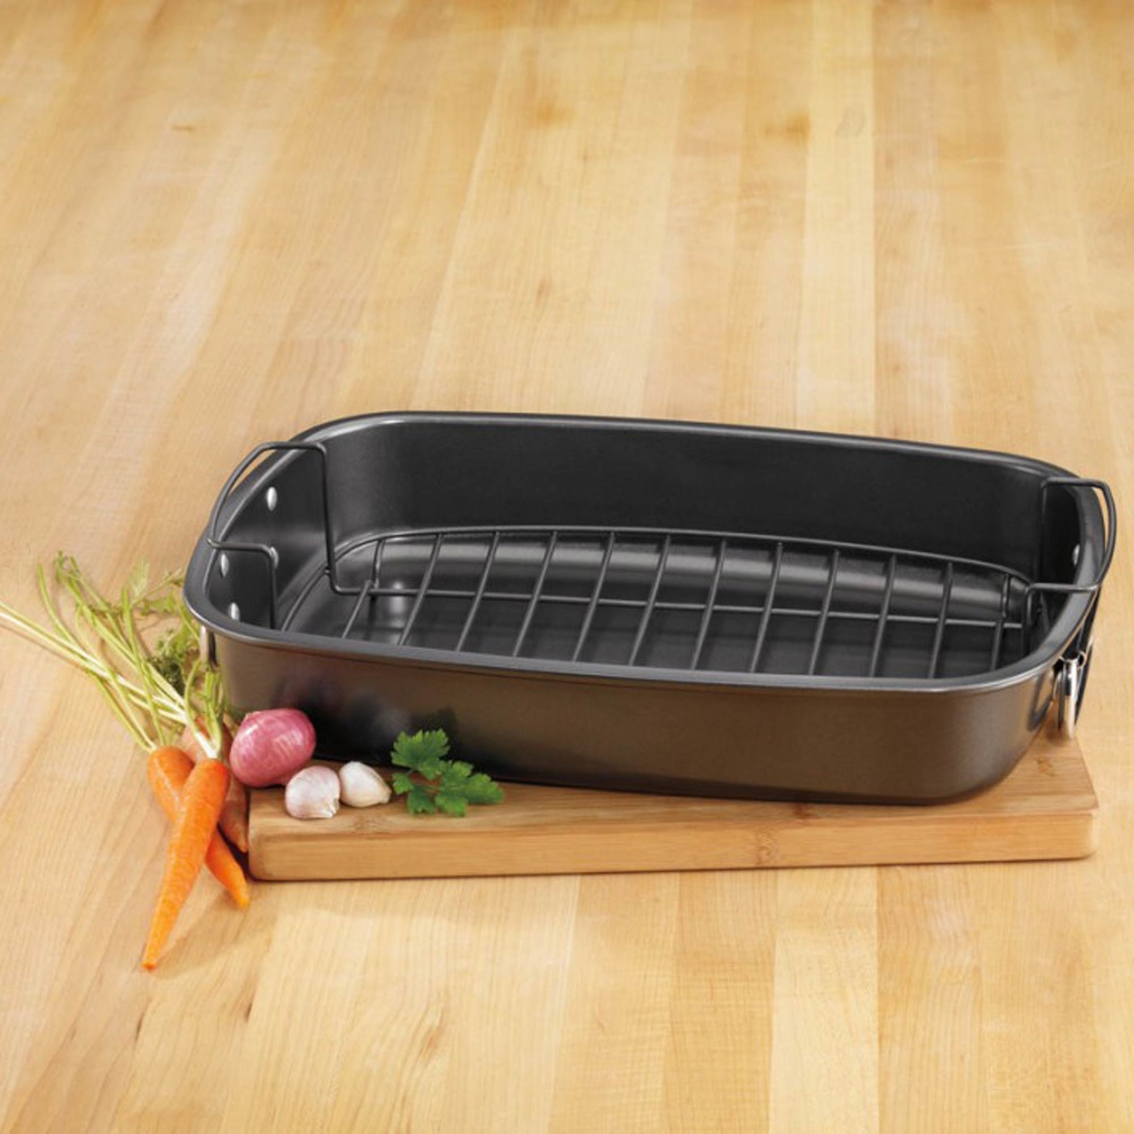 Cuisinart Ovenware Classic Collection Carbon Steel Roaster with Rack 17 x 12 in. - Image 2 of 2